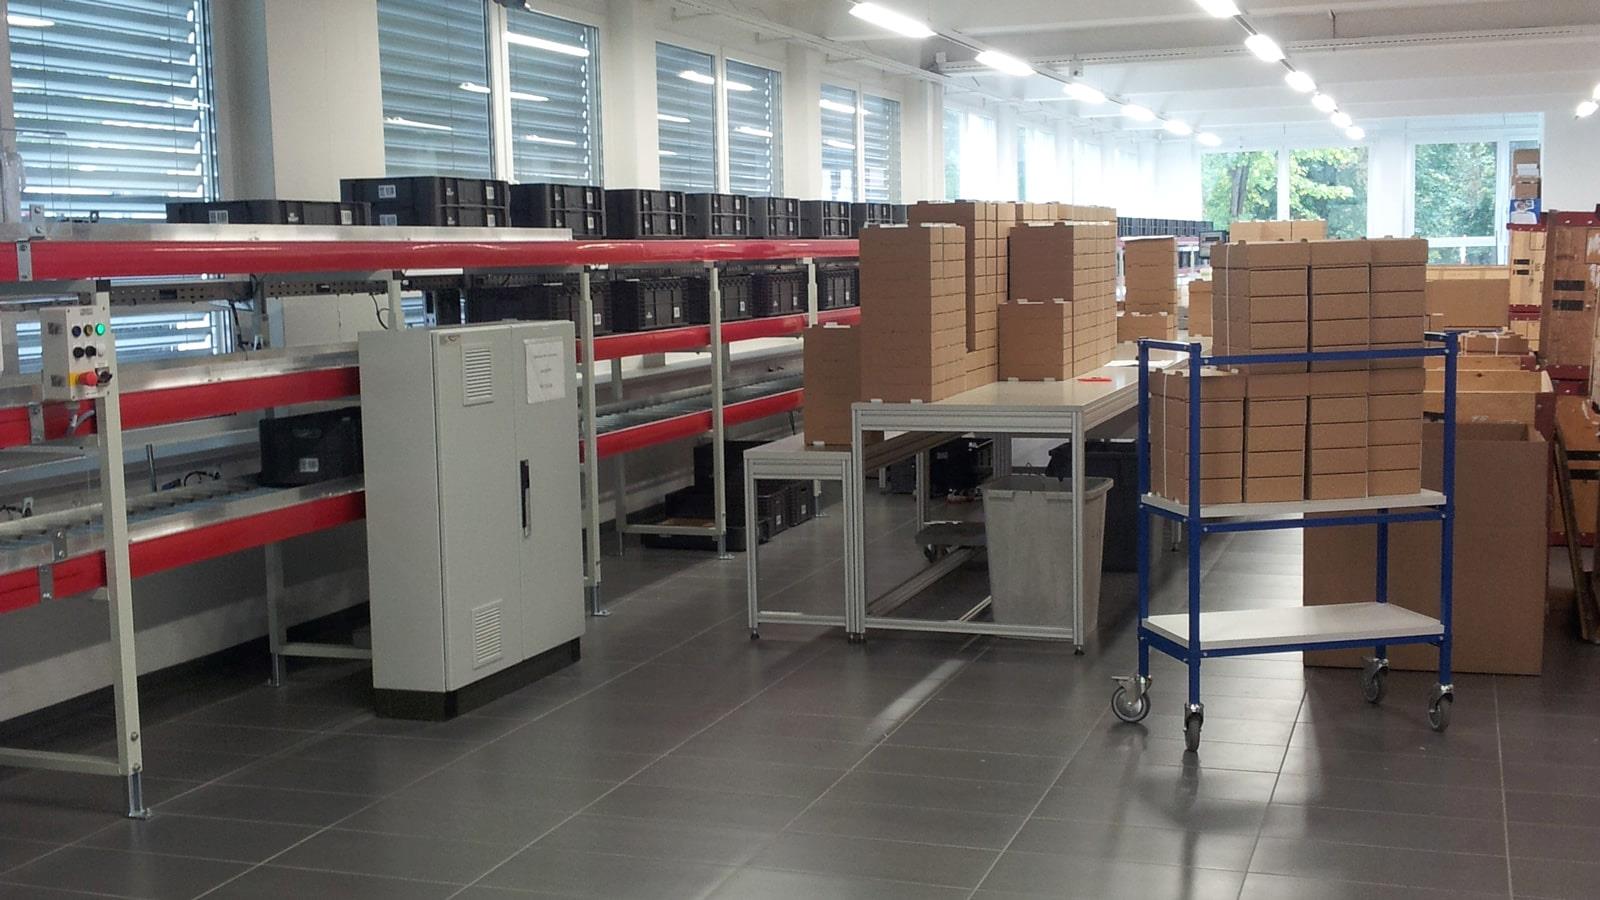 Stacks of cardboard boxes in production hall of Swiss tissot